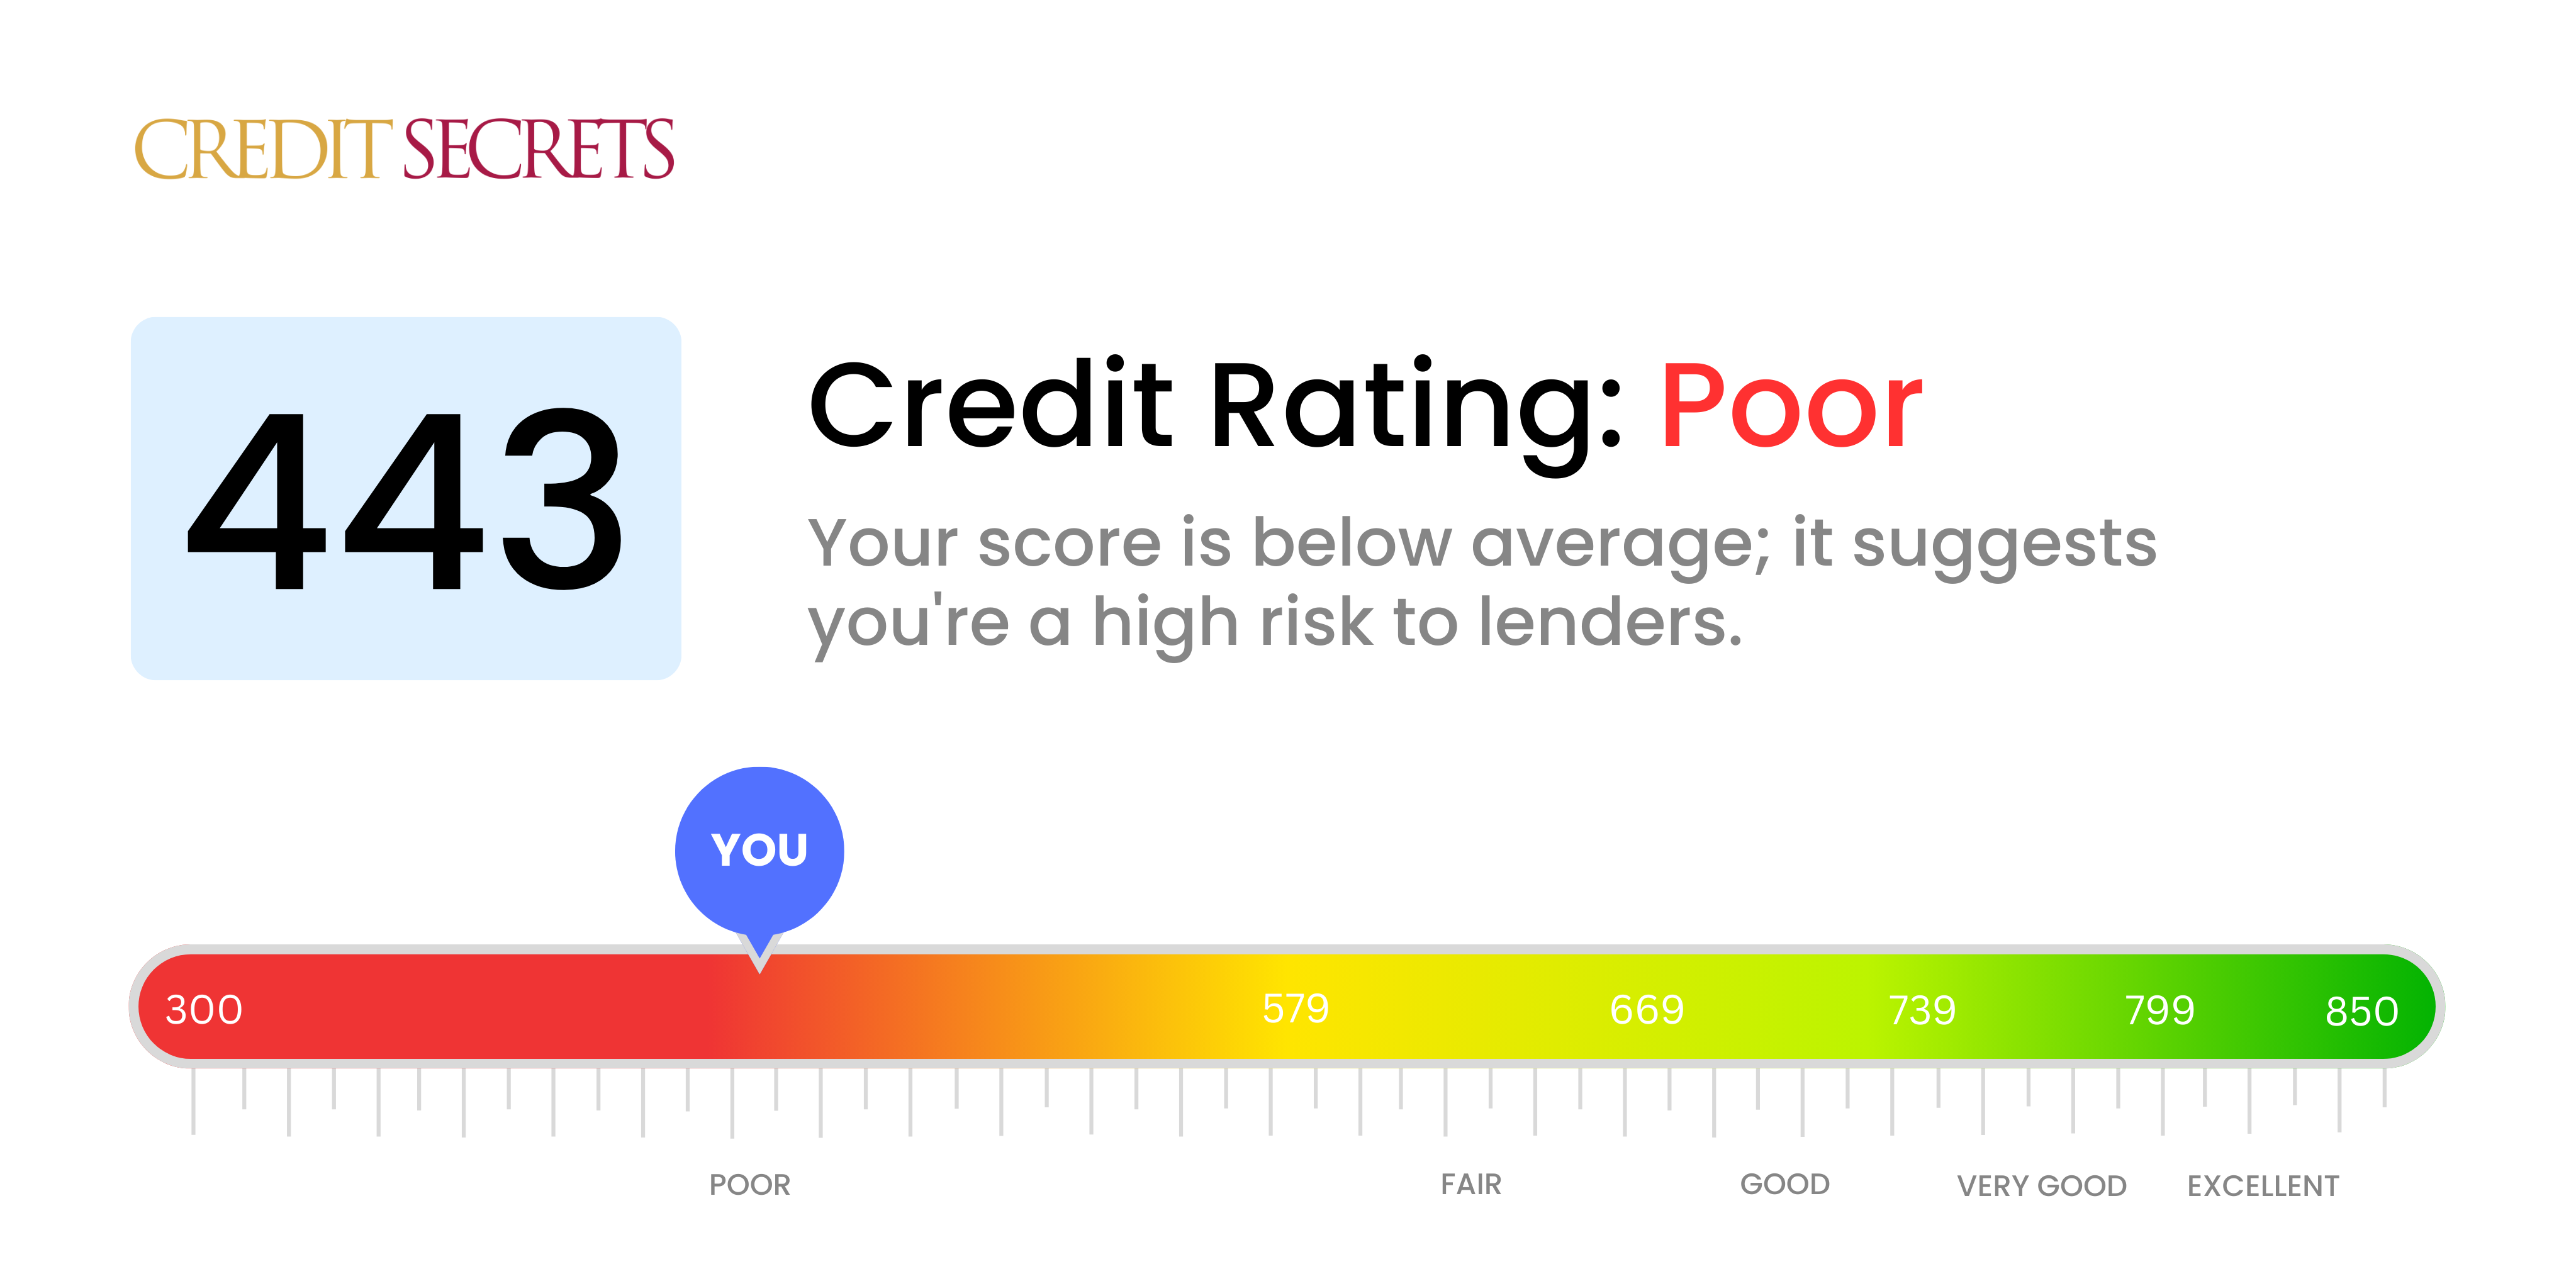 Is 443 a good credit score?